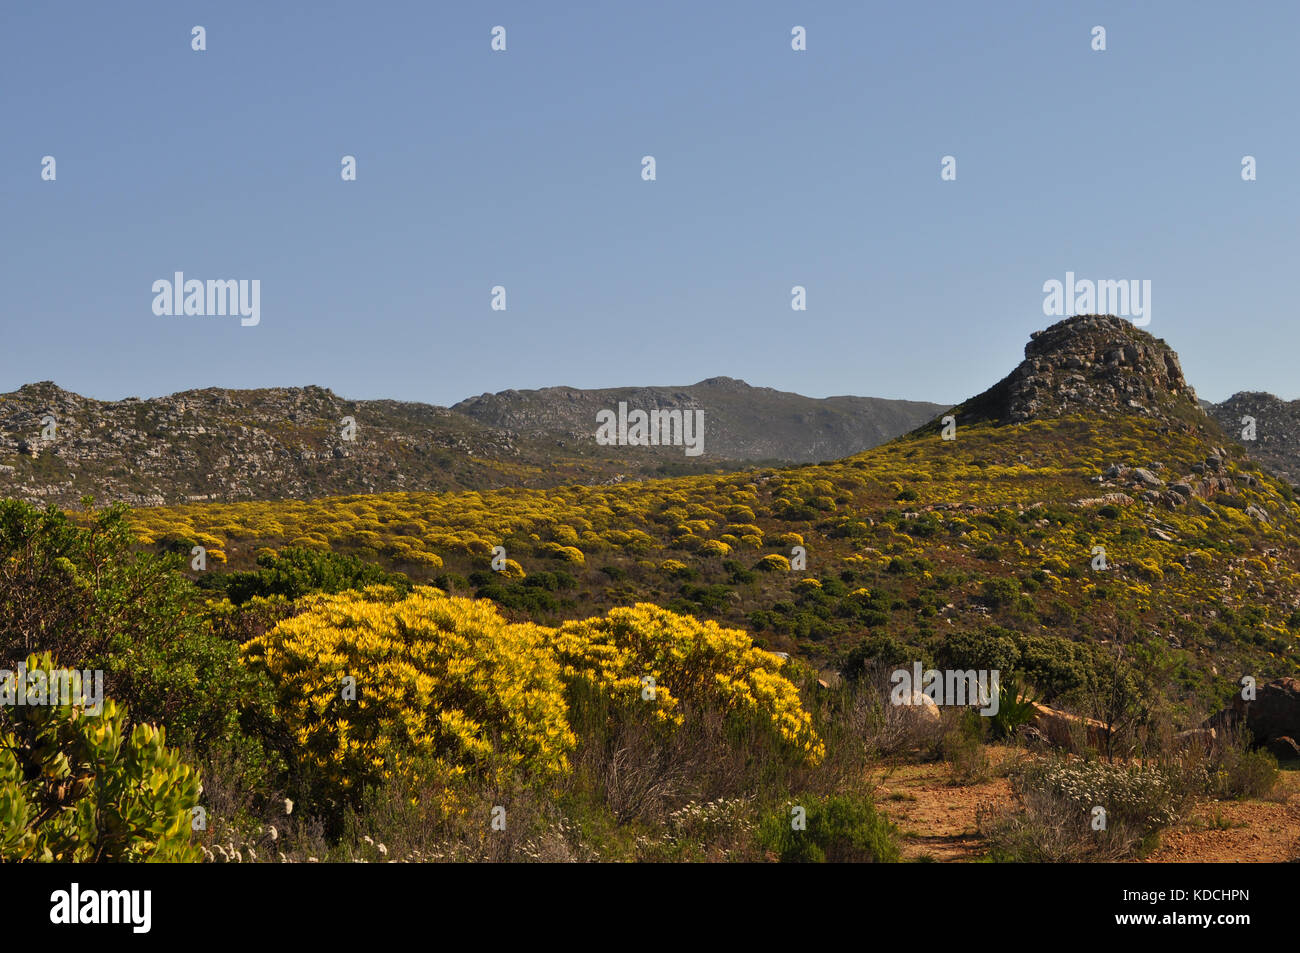 View near silvermine riserva naturale, table mountain national park, cape town, Sud Africa Foto Stock